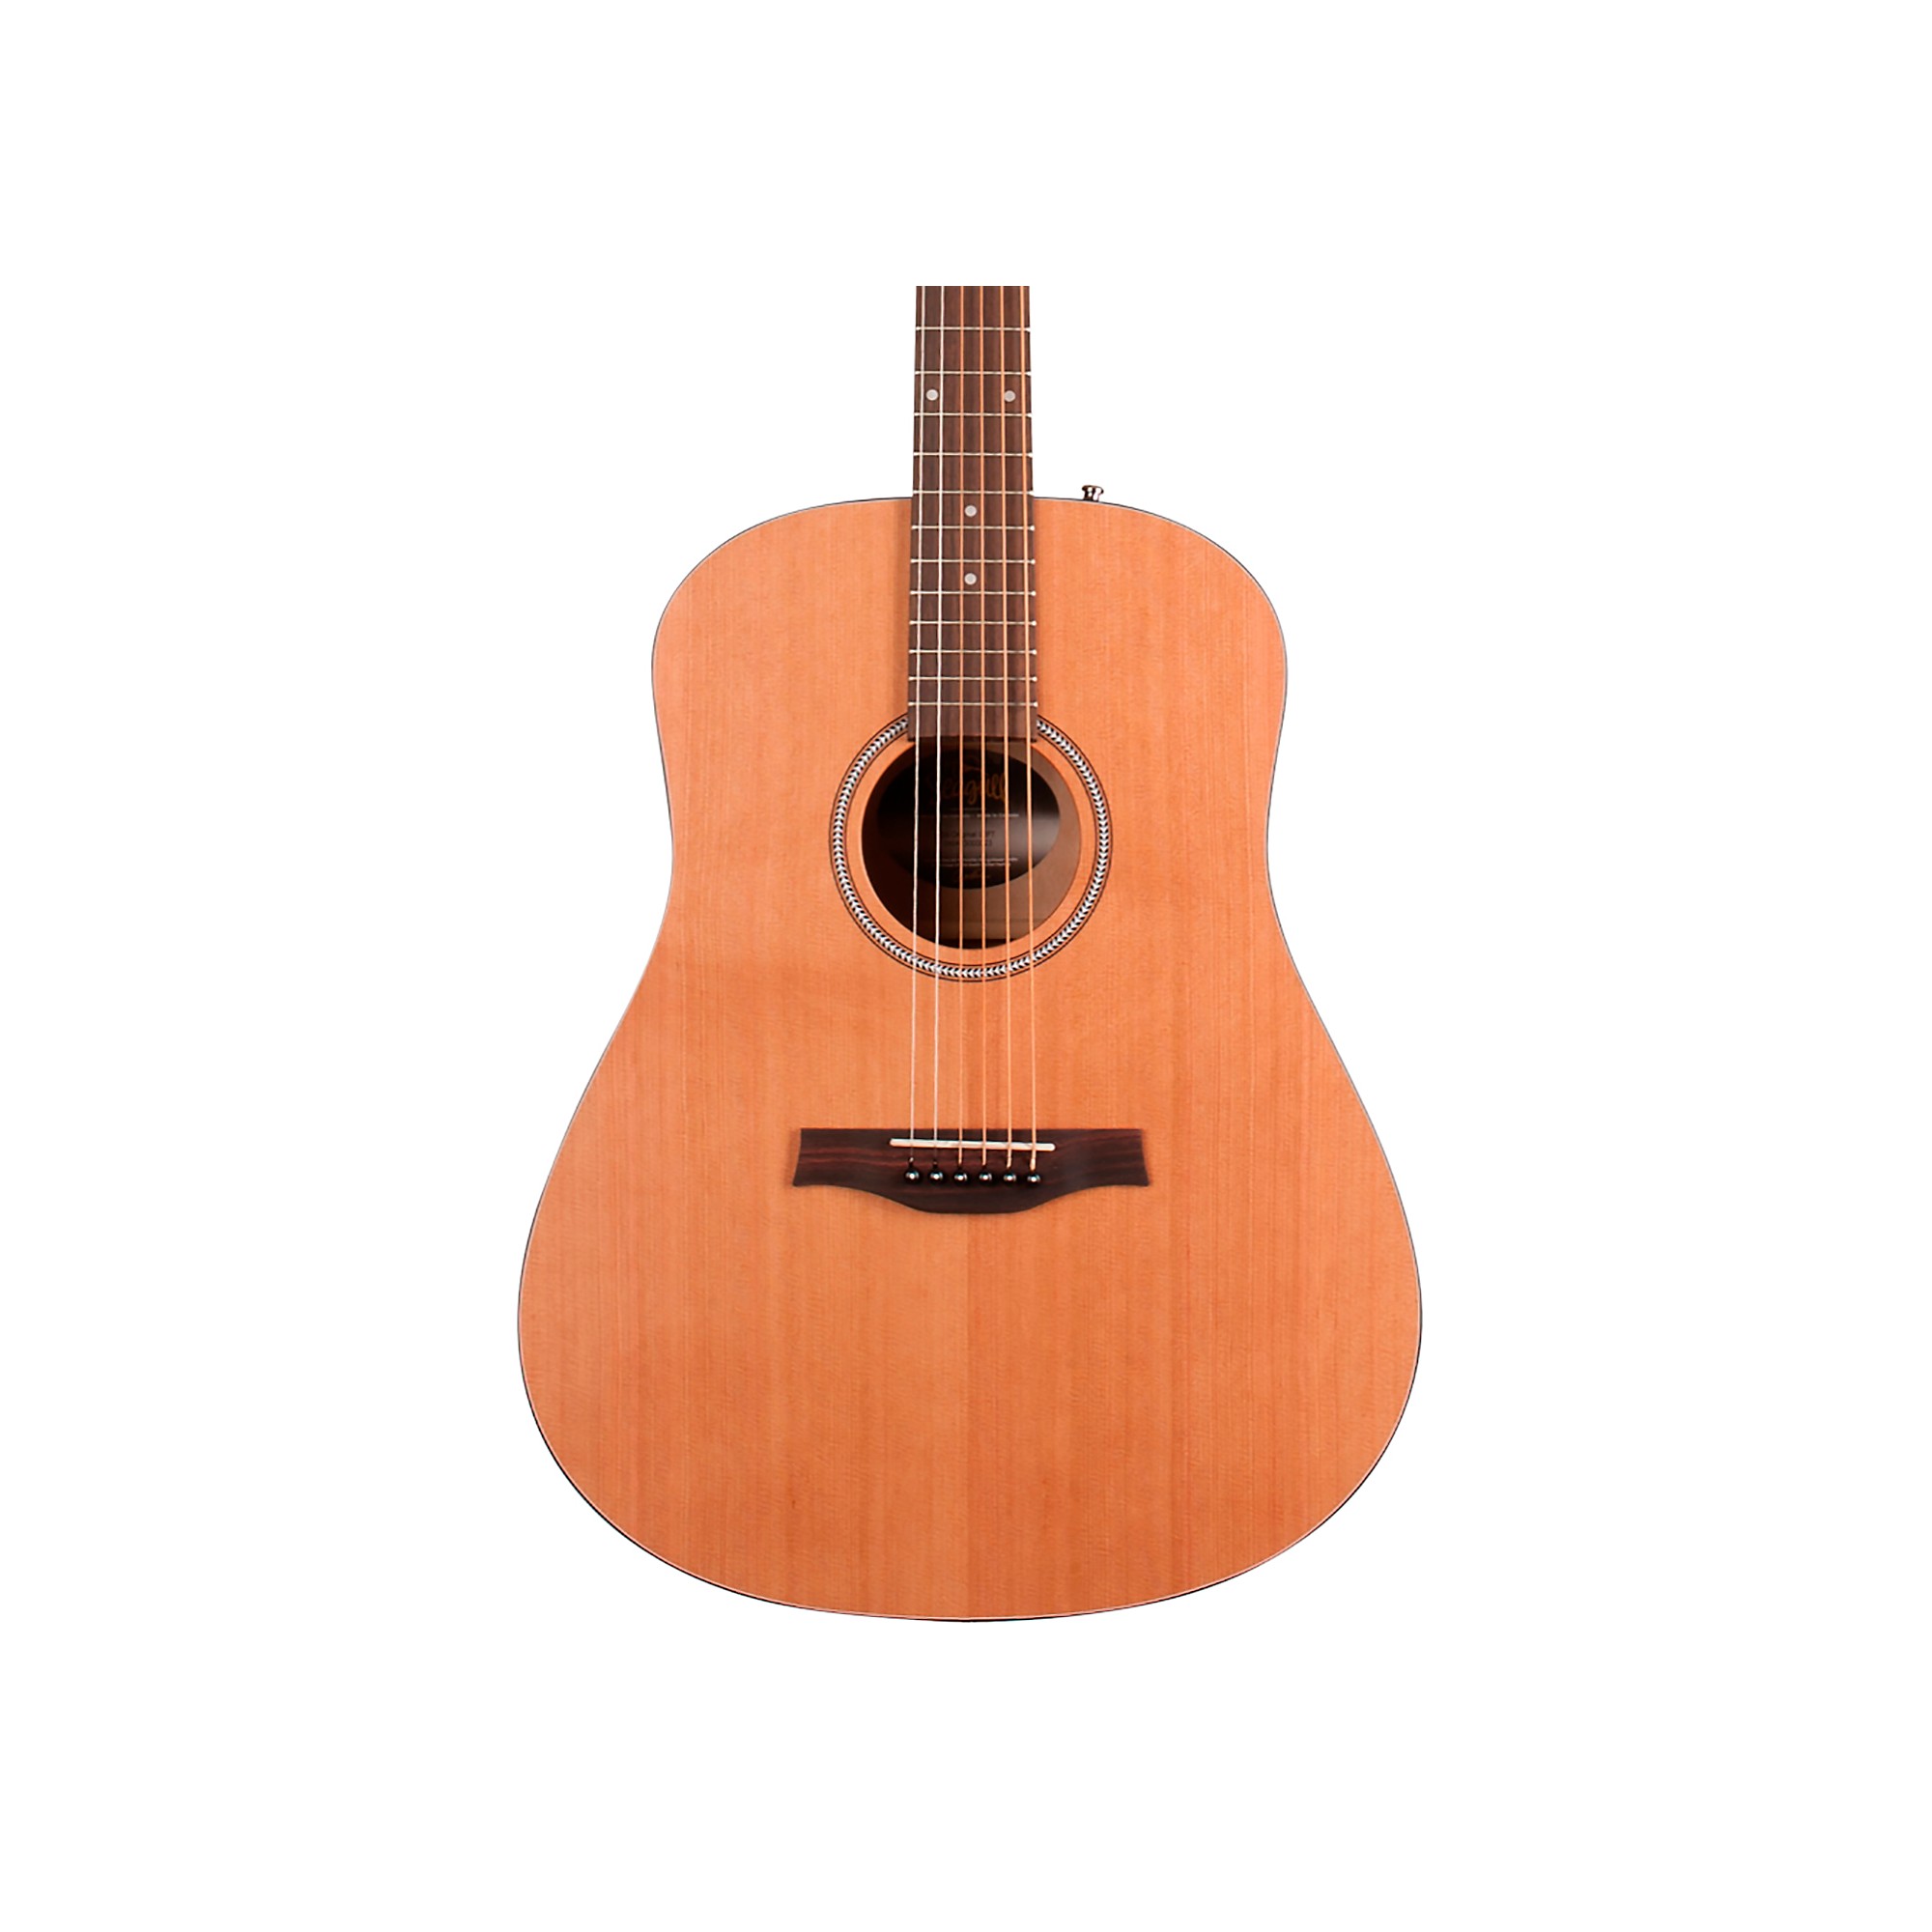 Seagull S6 Original Left-Handed Acoustic Guitar - ギター